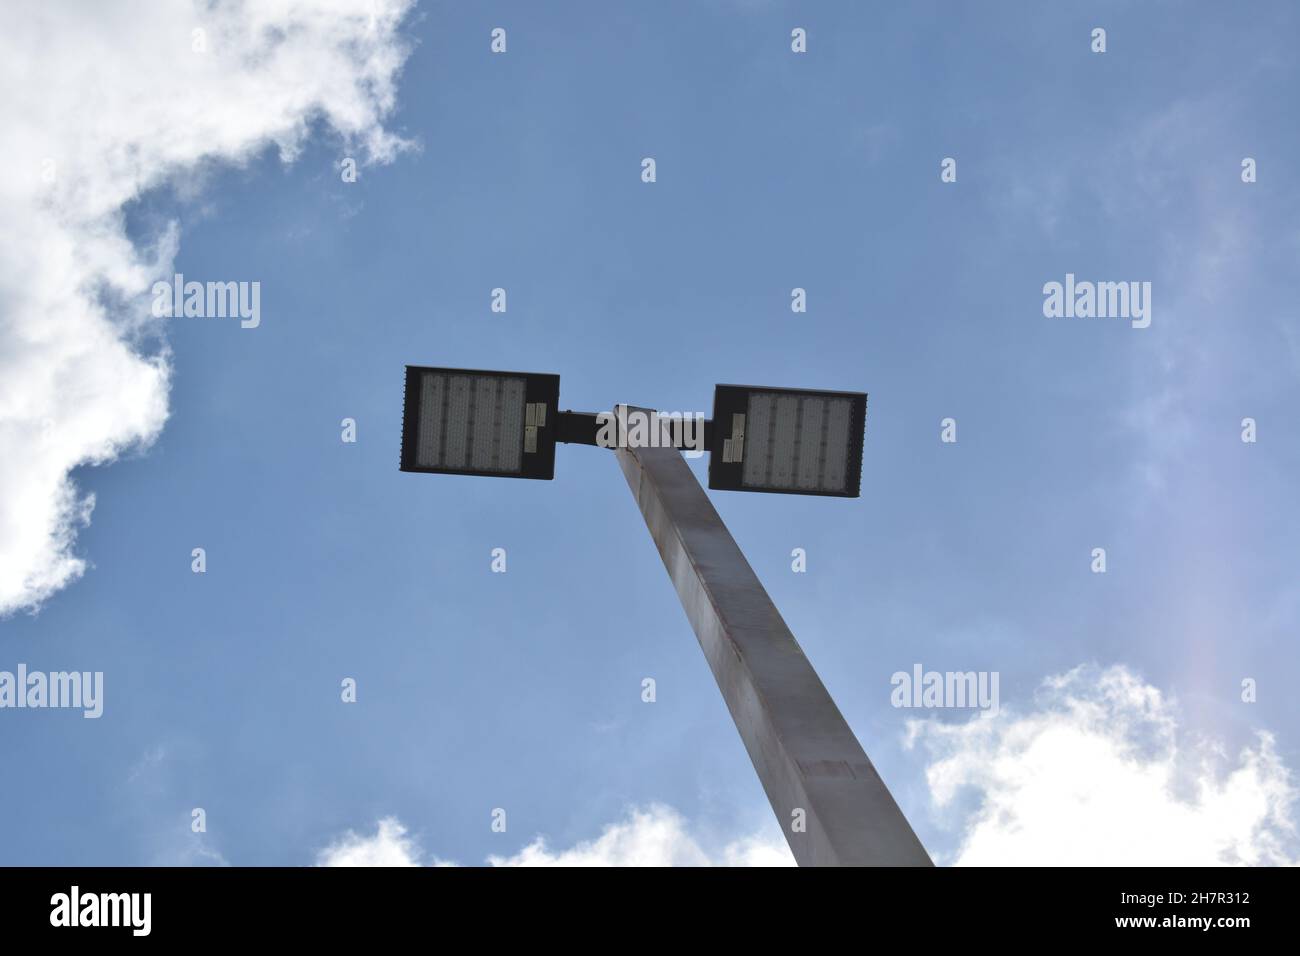 An overhead light on a bright day. Stock Photo